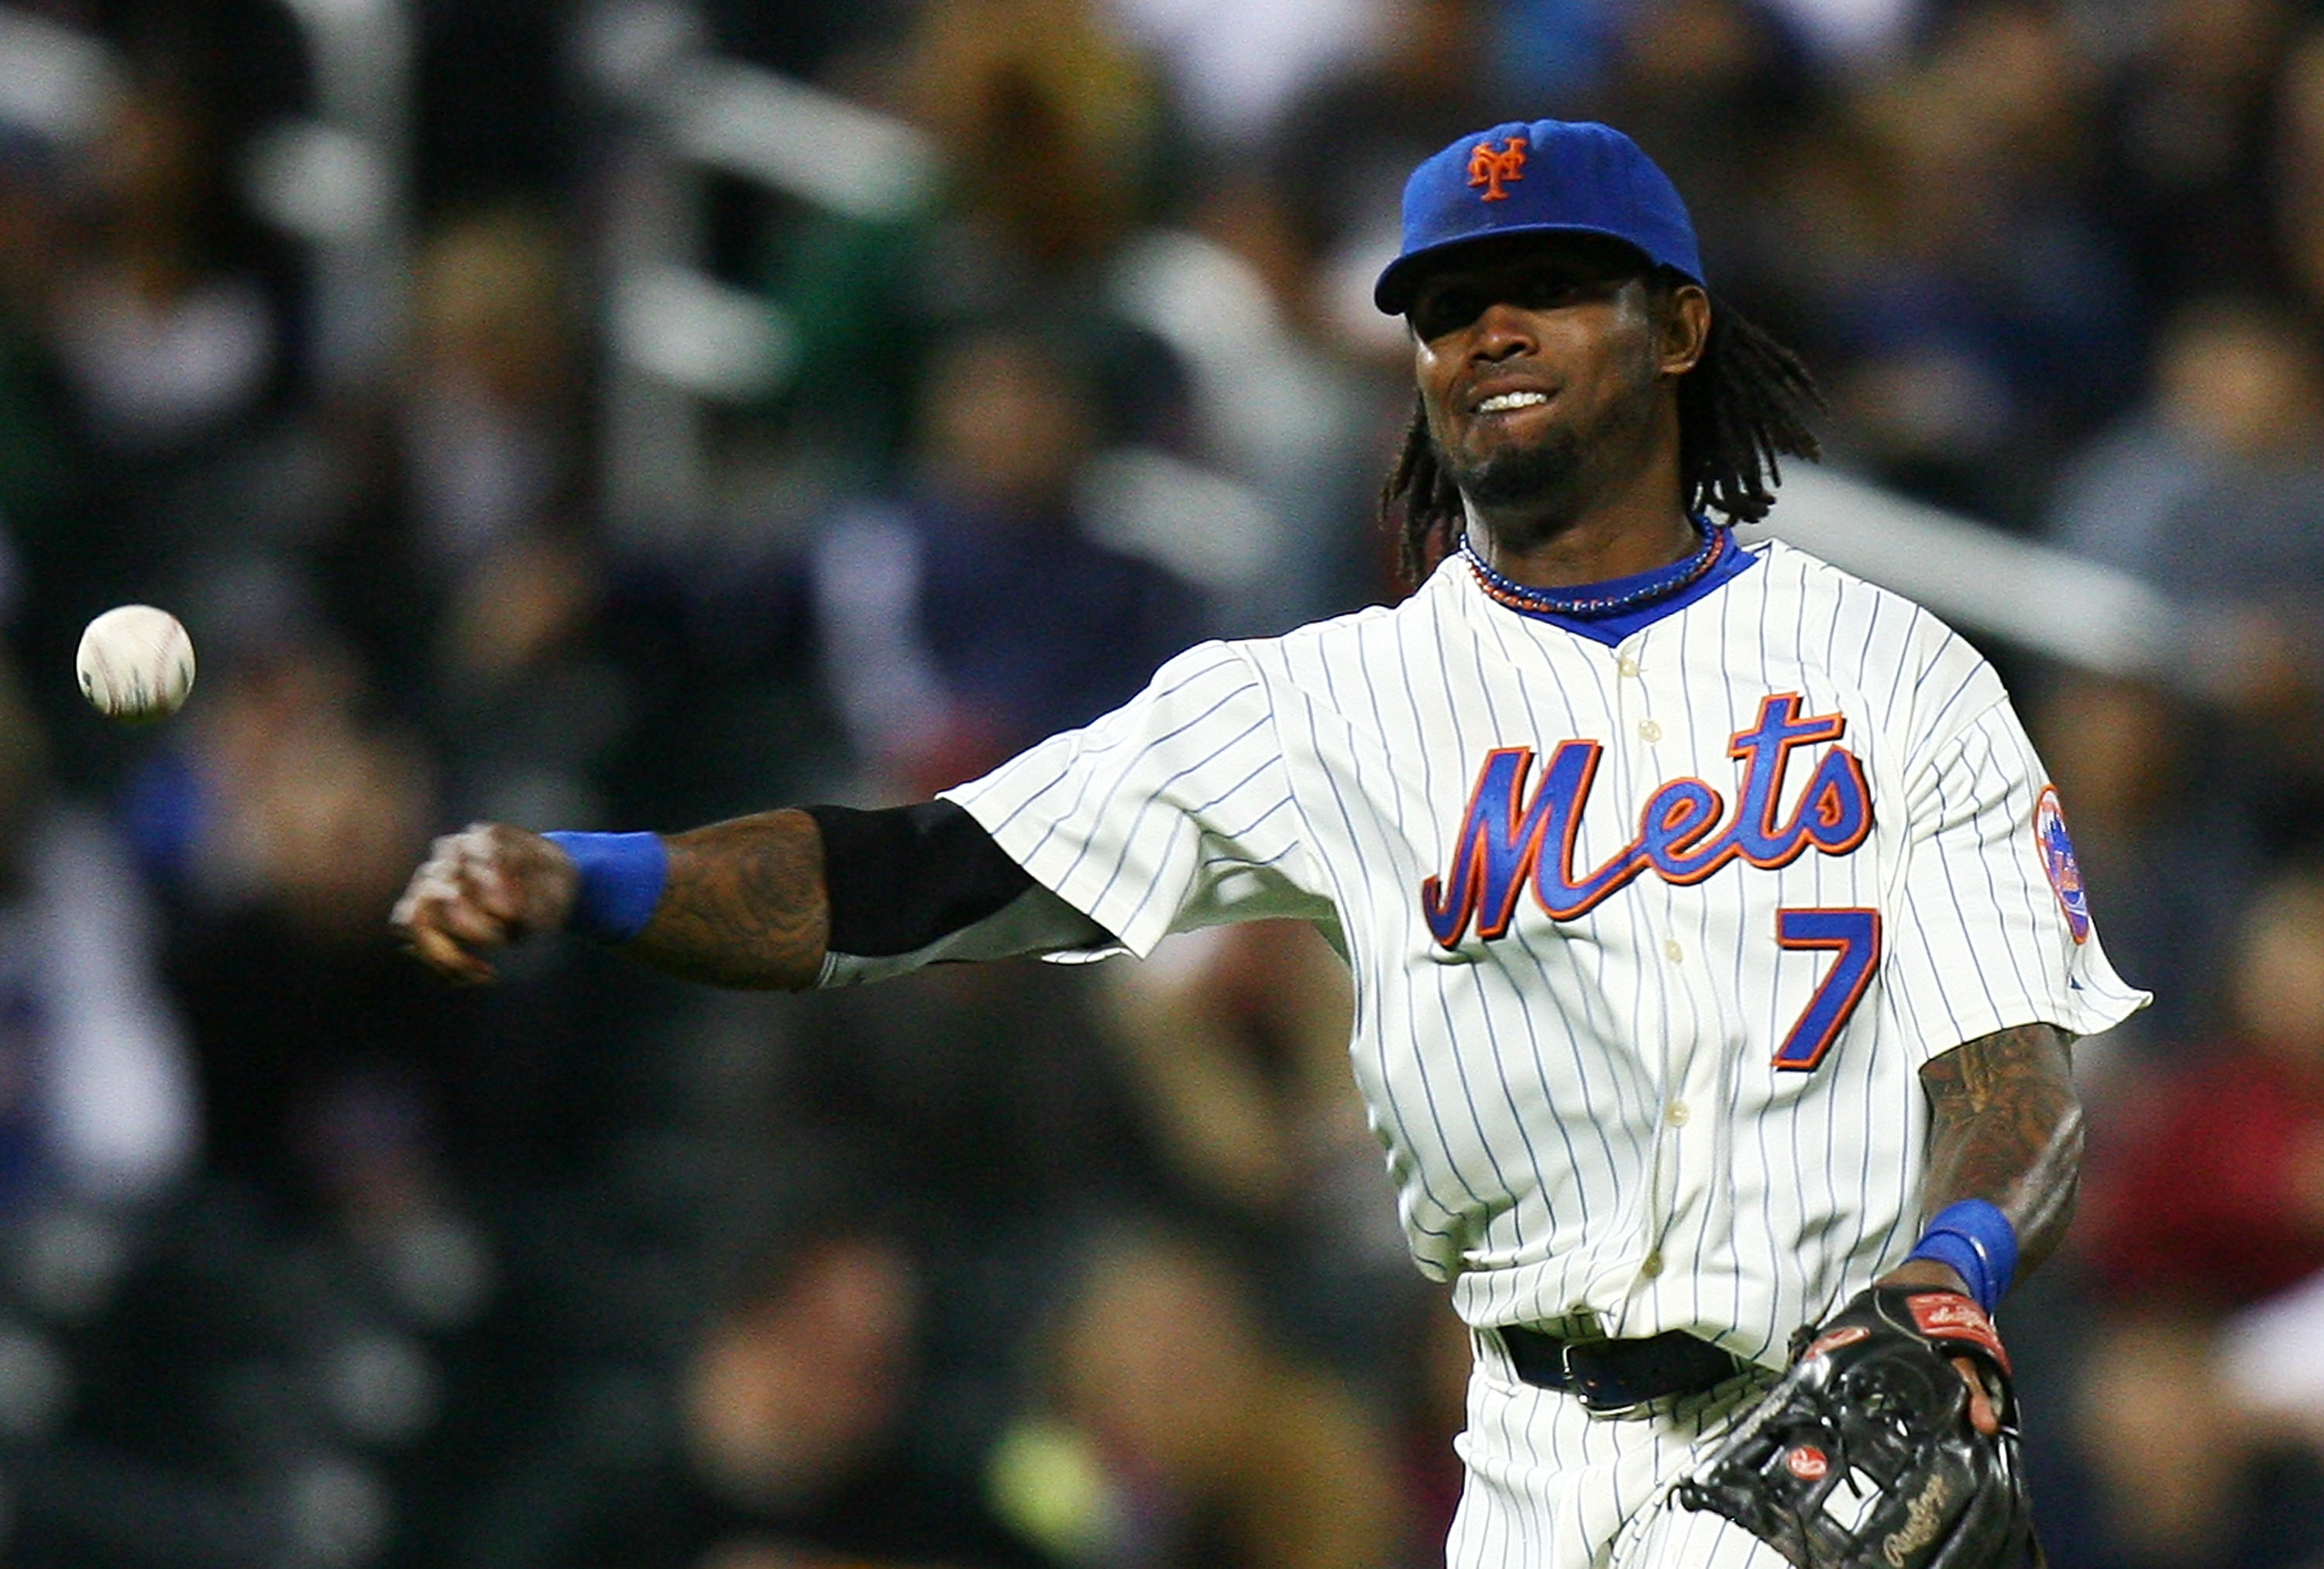 MLB Preview 2011: Looking at Jose Reyes and the New York Mets On